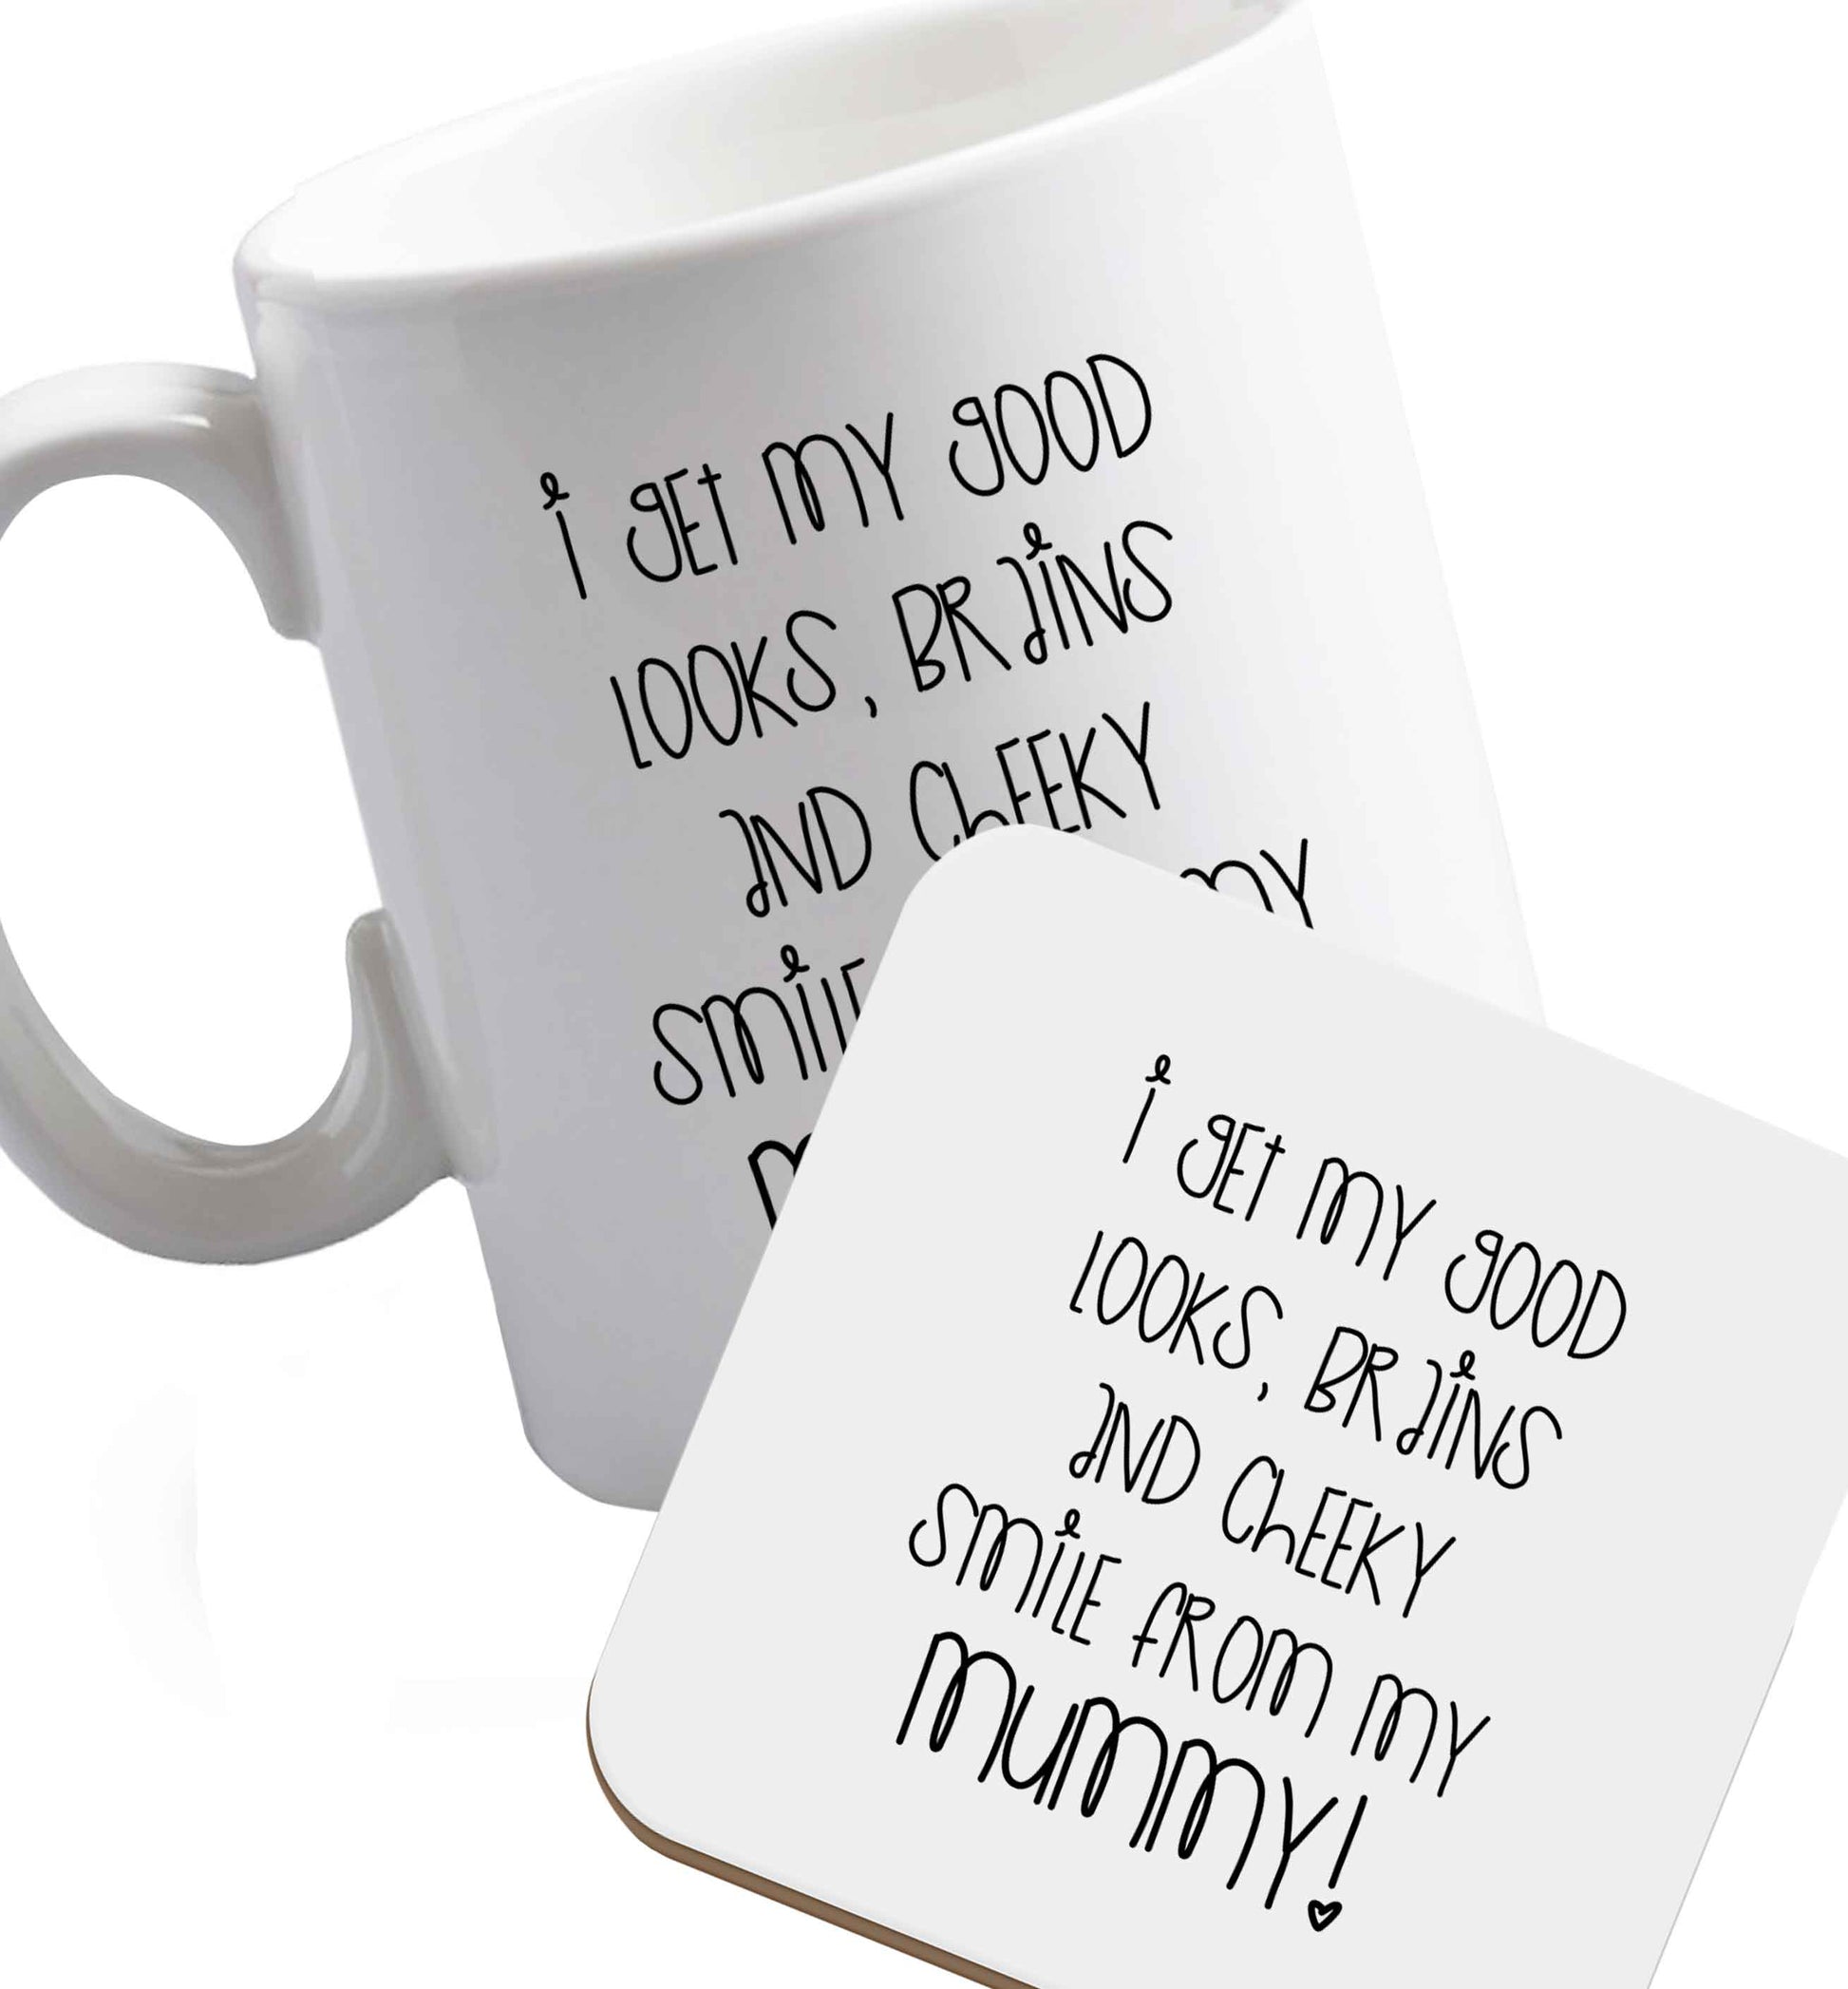 10 oz I get my good looks, brains and cheeky smile from my mummy ceramic mug and coaster set right handed